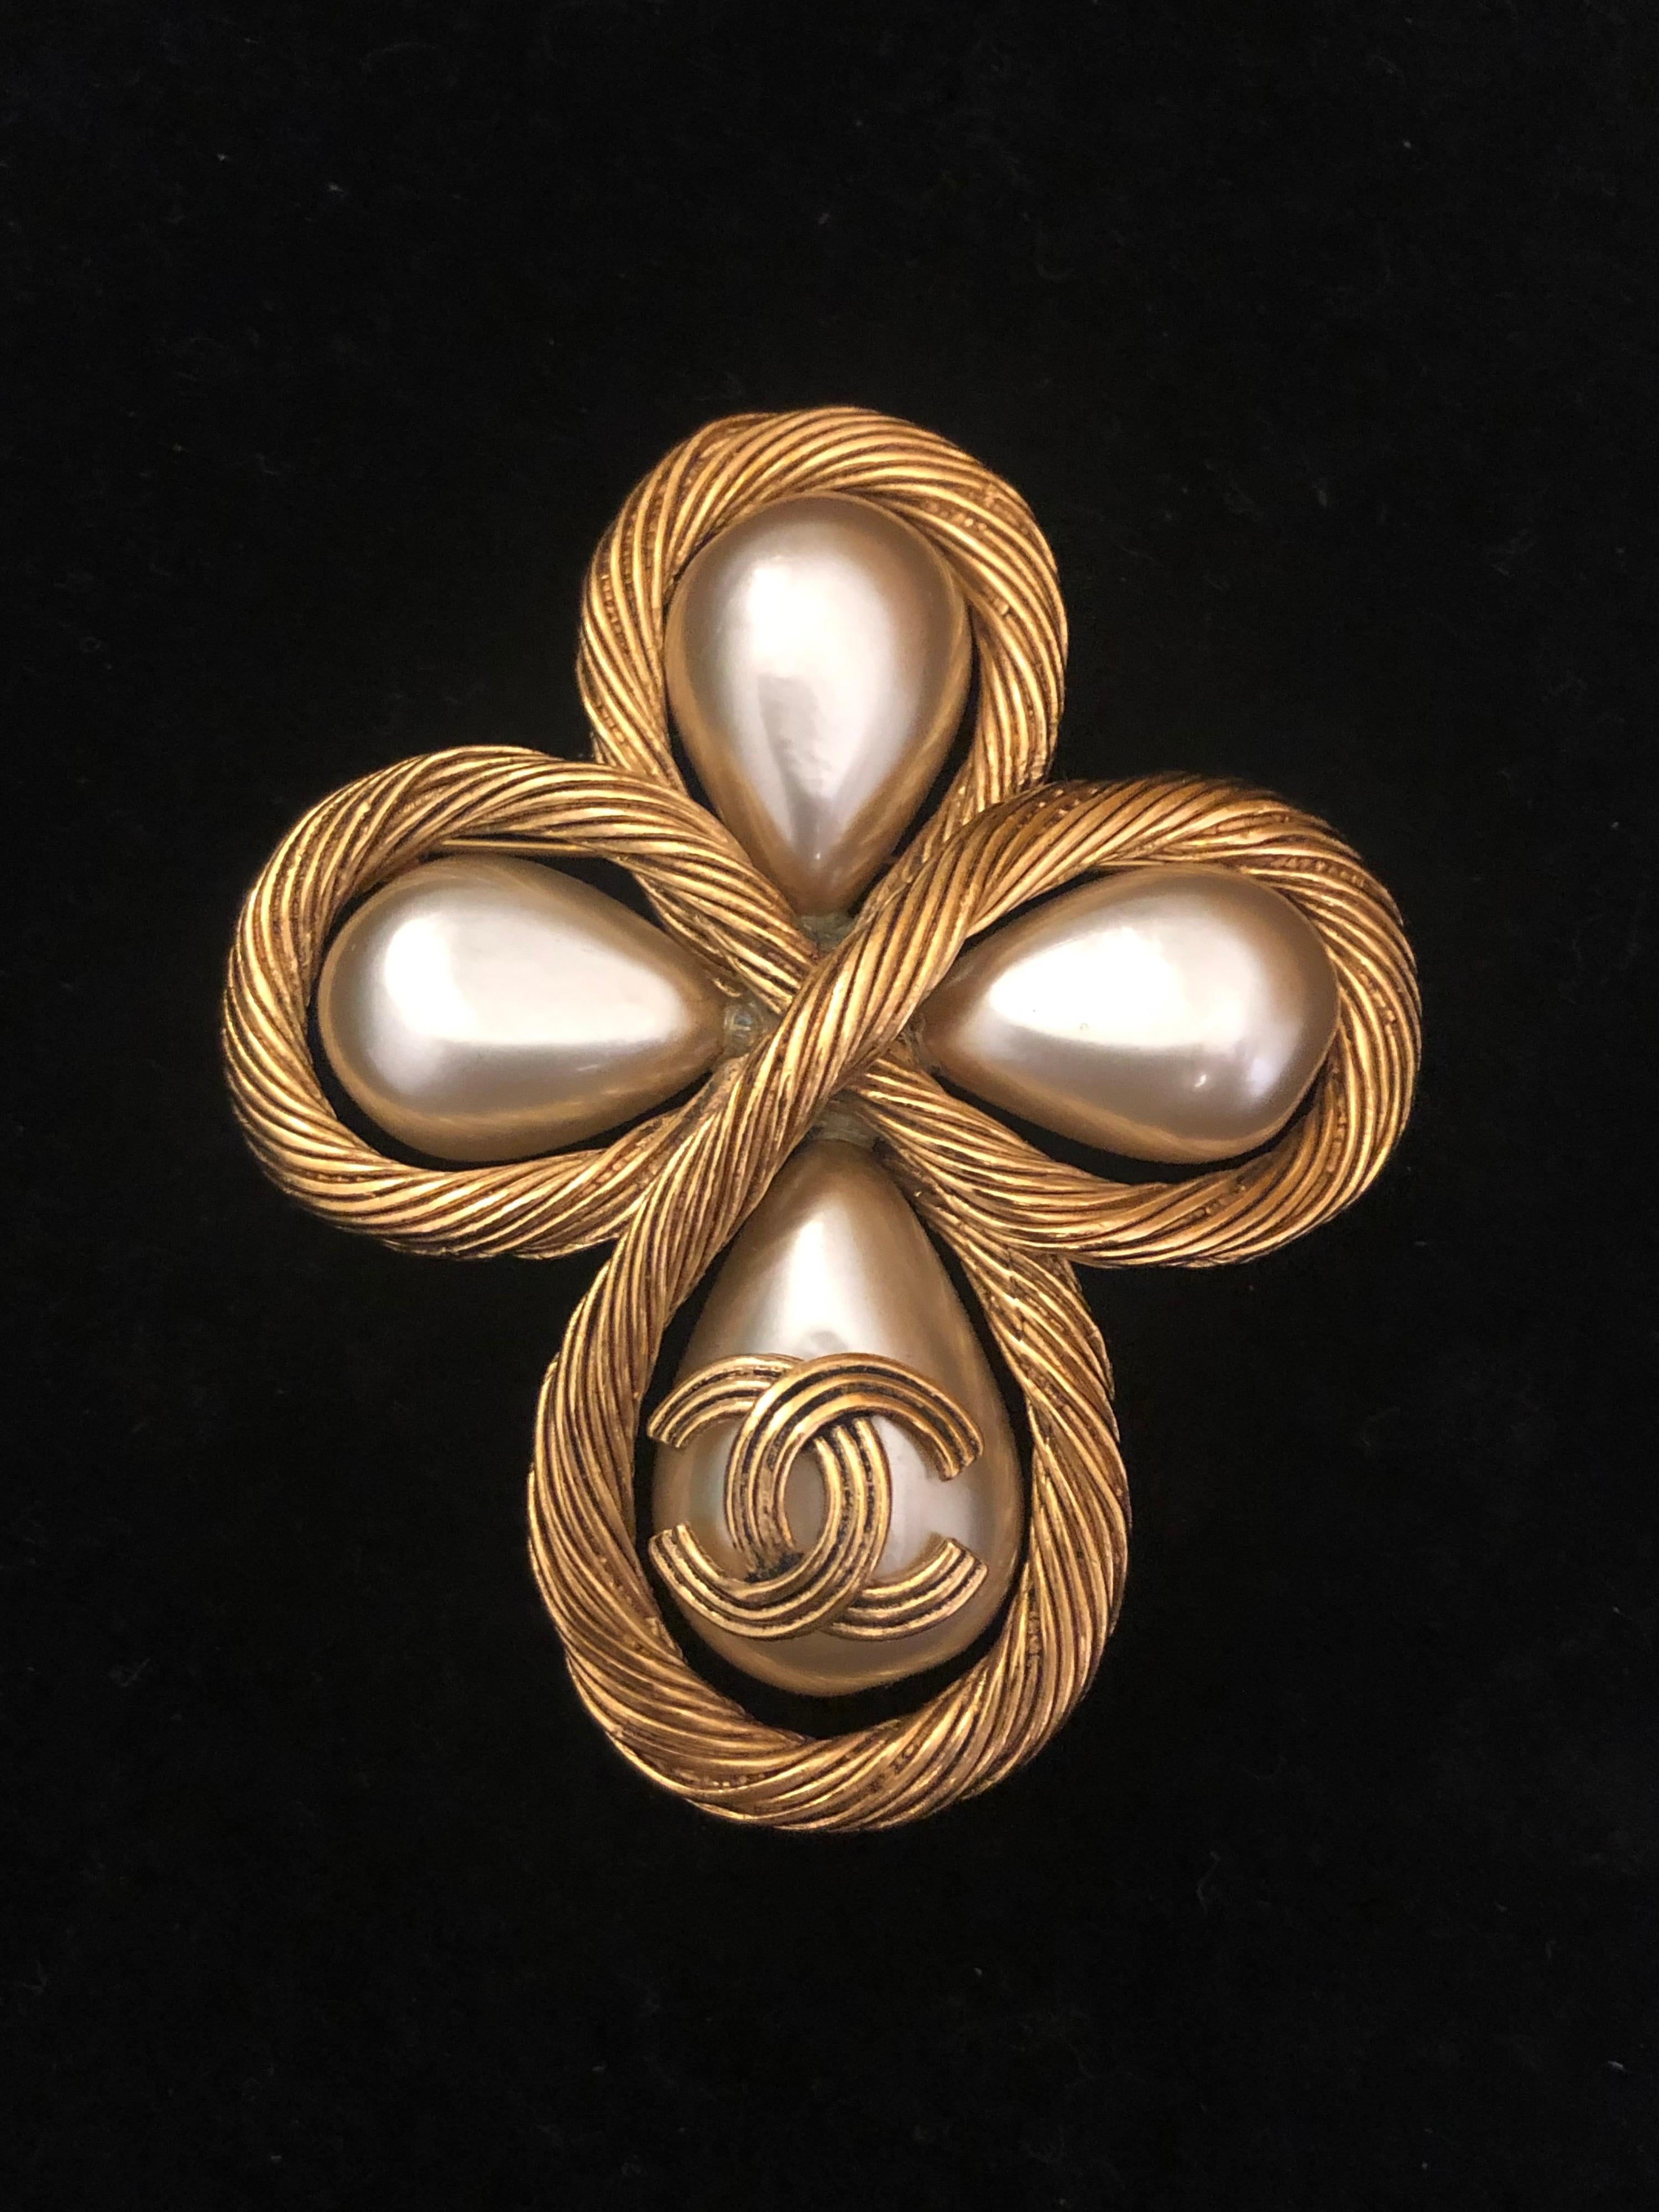 1990s Chanel gold toned brooch featuring four faux pearl drops adorned with a gold toned CC logo on the front. Stamped CHANEL 94A made in France. Measures approximately 7.1 x 6.0 cm. Comes with box. 

Condition: Minor signs of wear. Generally in